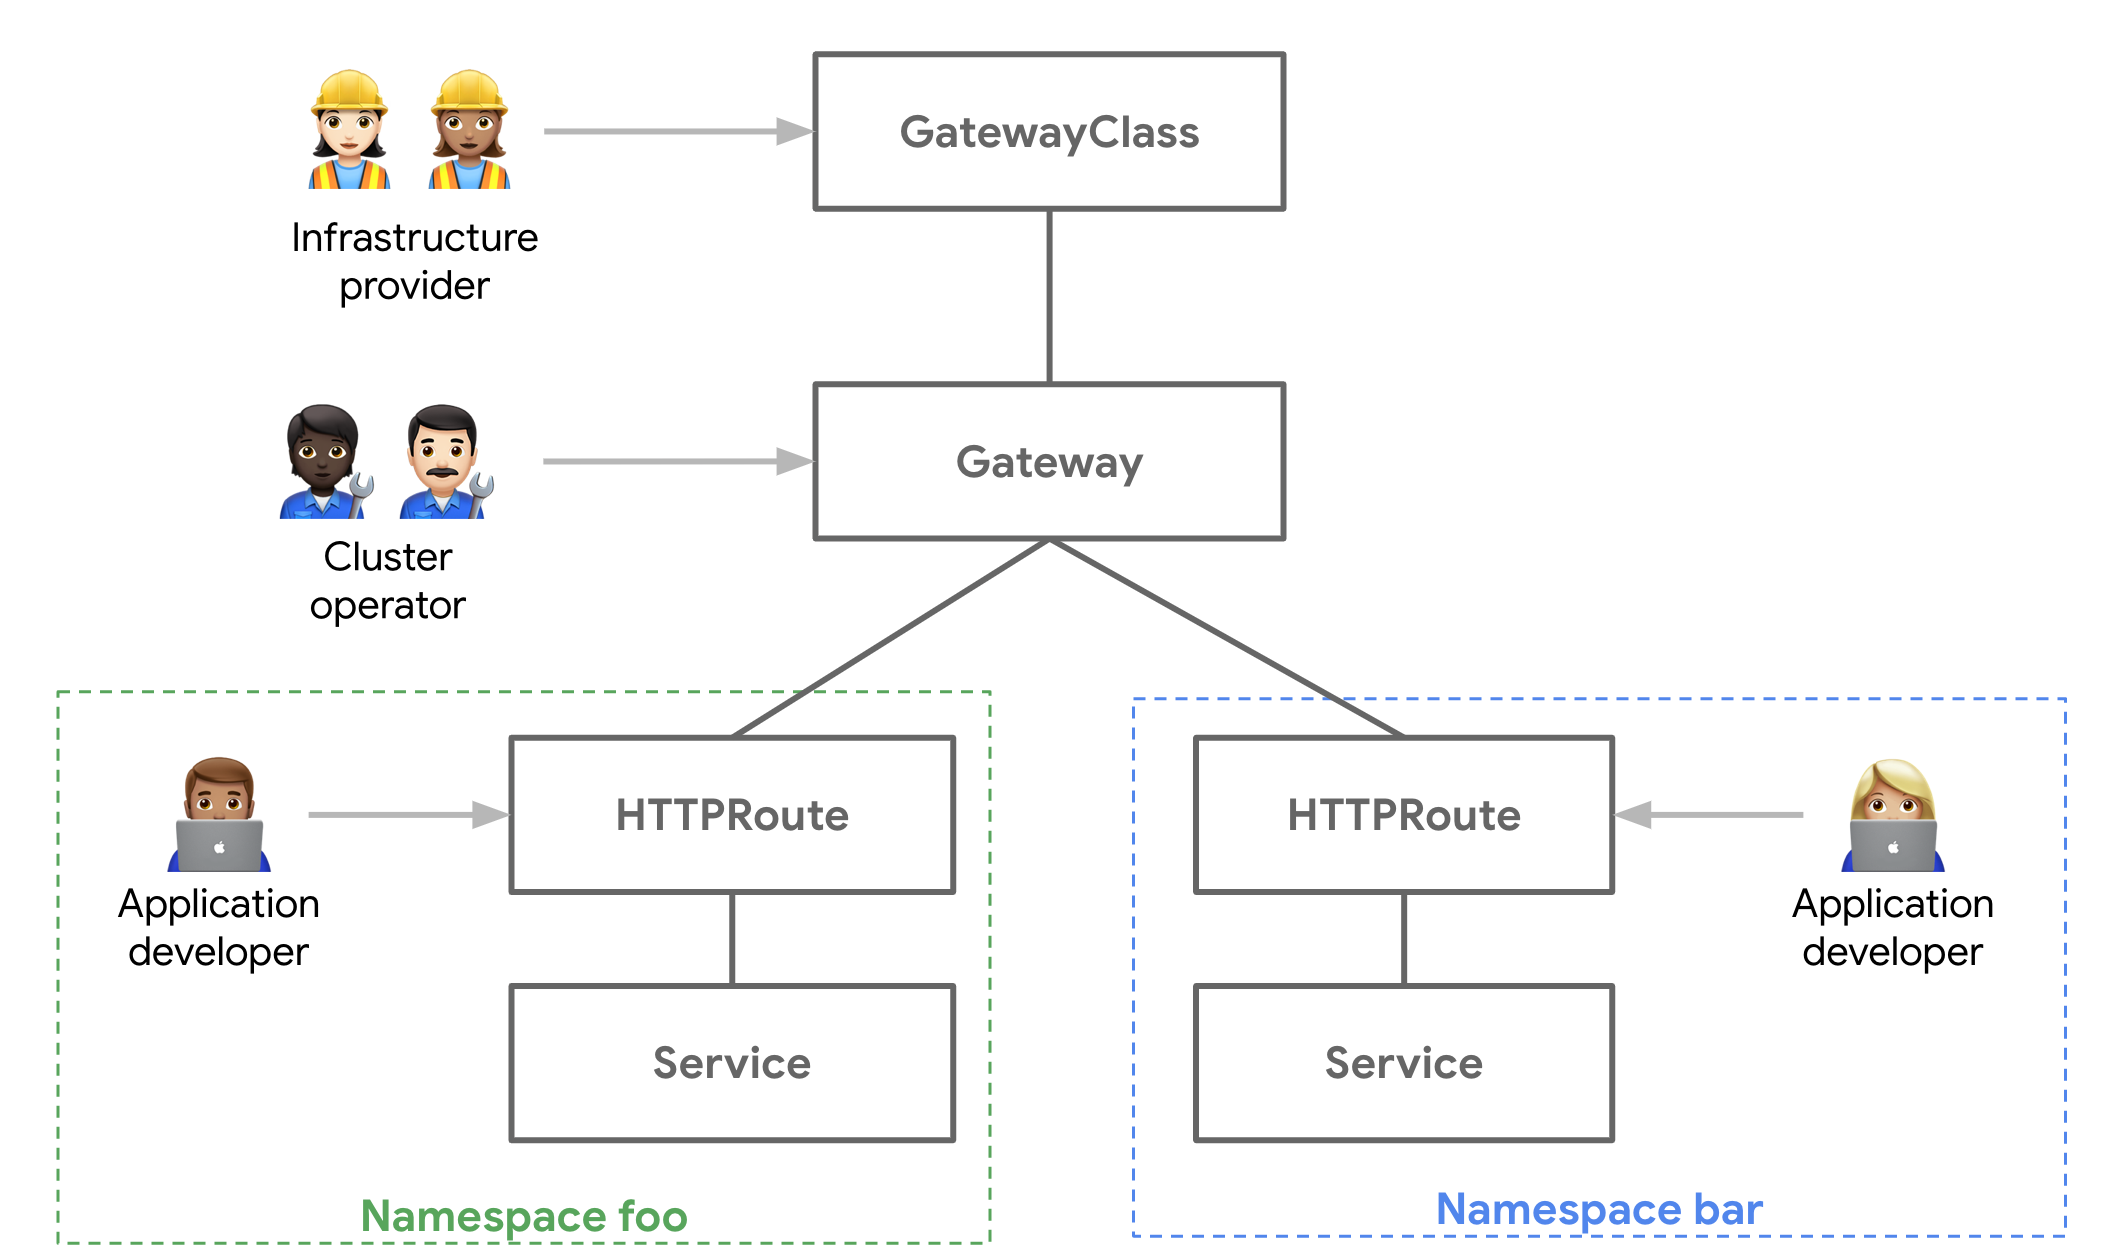 The resources of the Gateway API